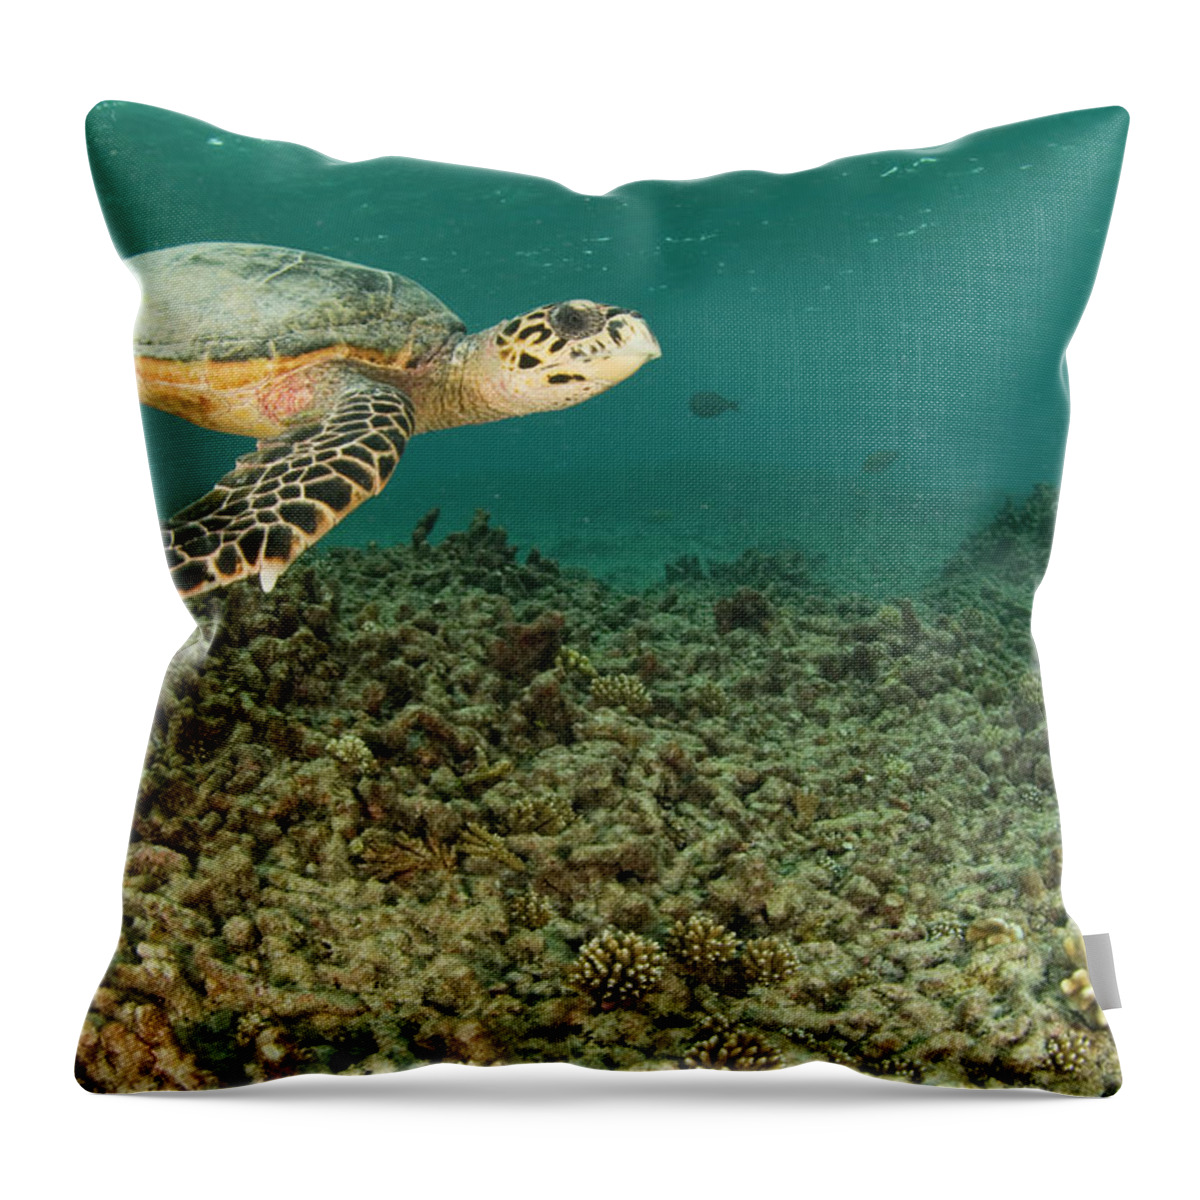 Underwater Throw Pillow featuring the photograph Turtle Swims Over Degraded Reef by Rainervonbrandis